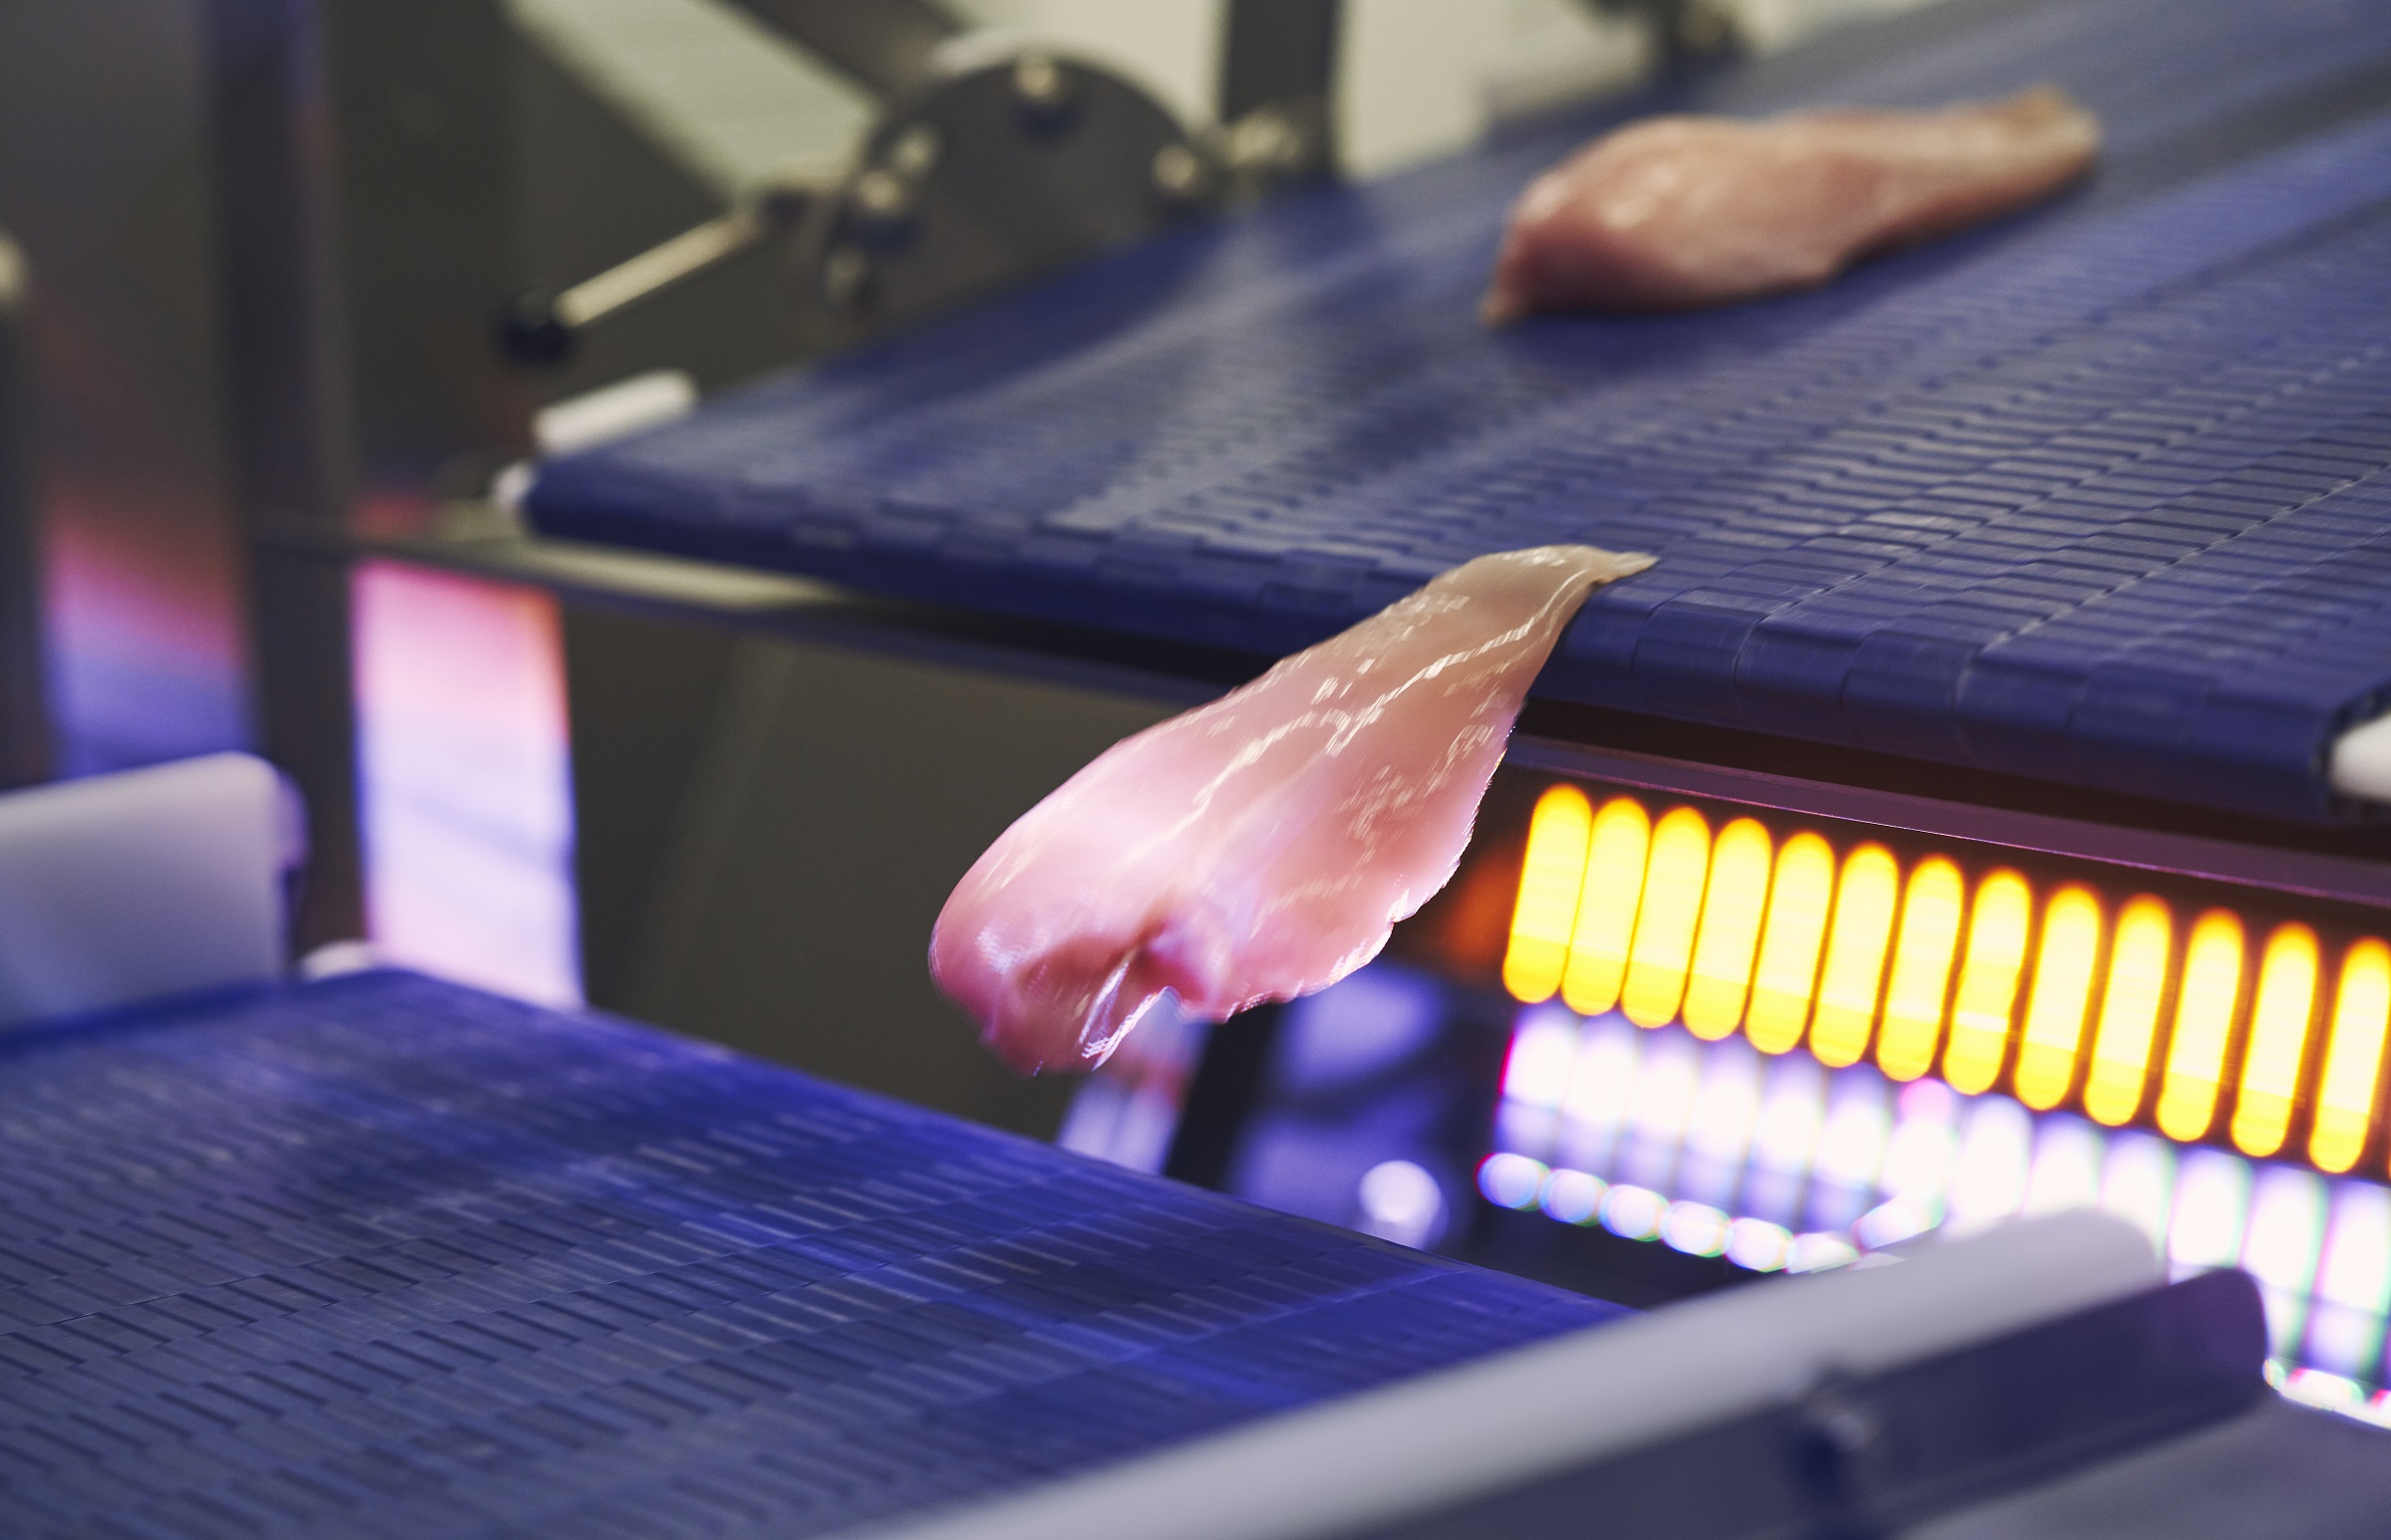 Marel joins European mEATquality research project